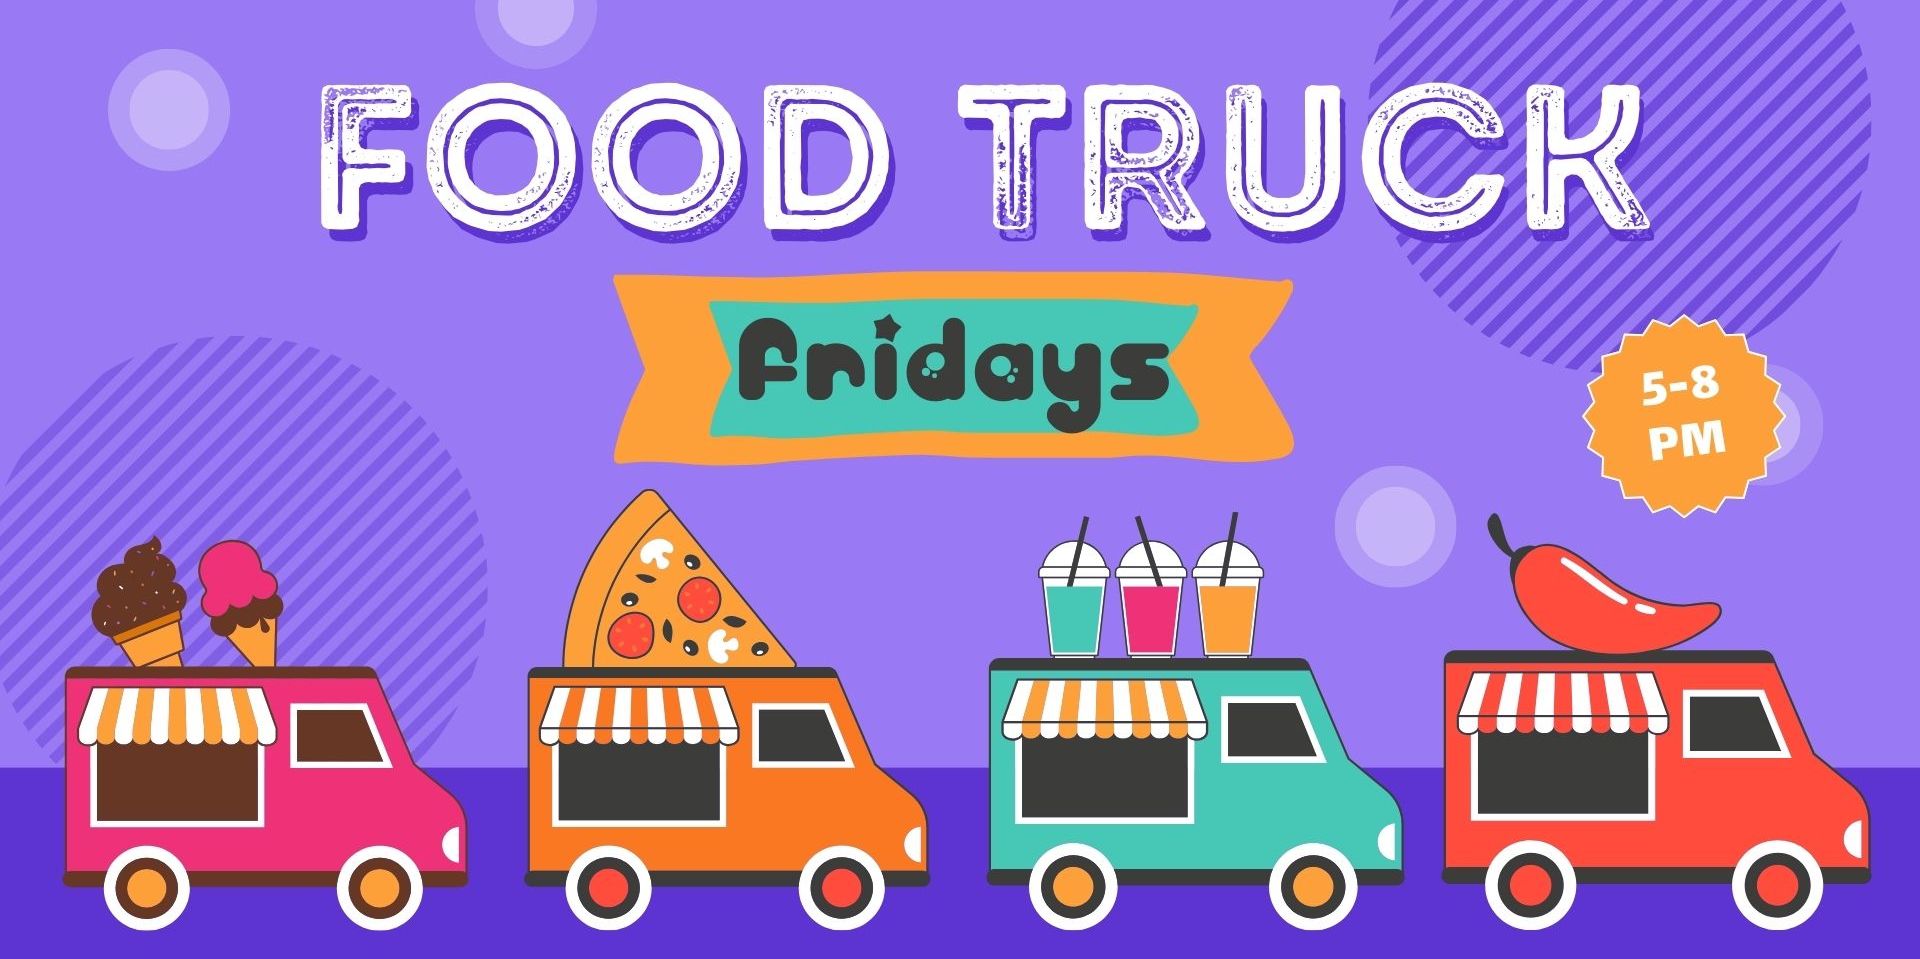 Food Truck Friday! promotional image